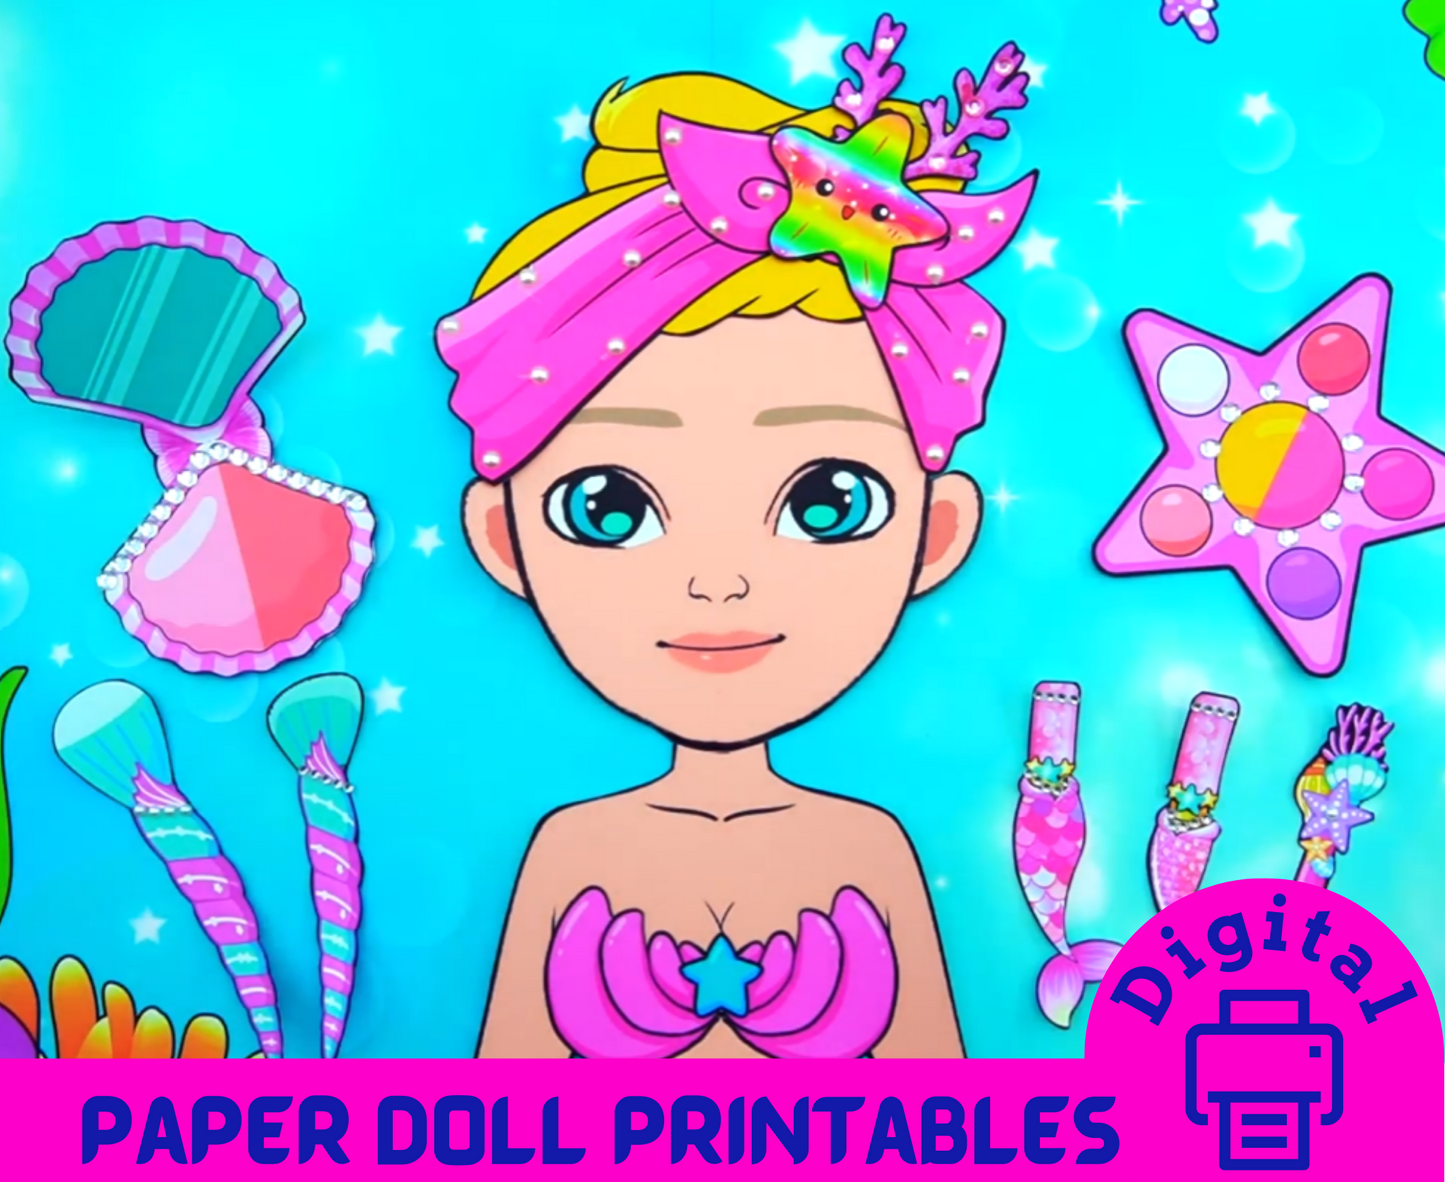 Shine bright with the printable mermaid make up kit 🌊 DIY kit for your little one - Paper doll house - Activity book for kids 🌊 Woa Doll Crafts